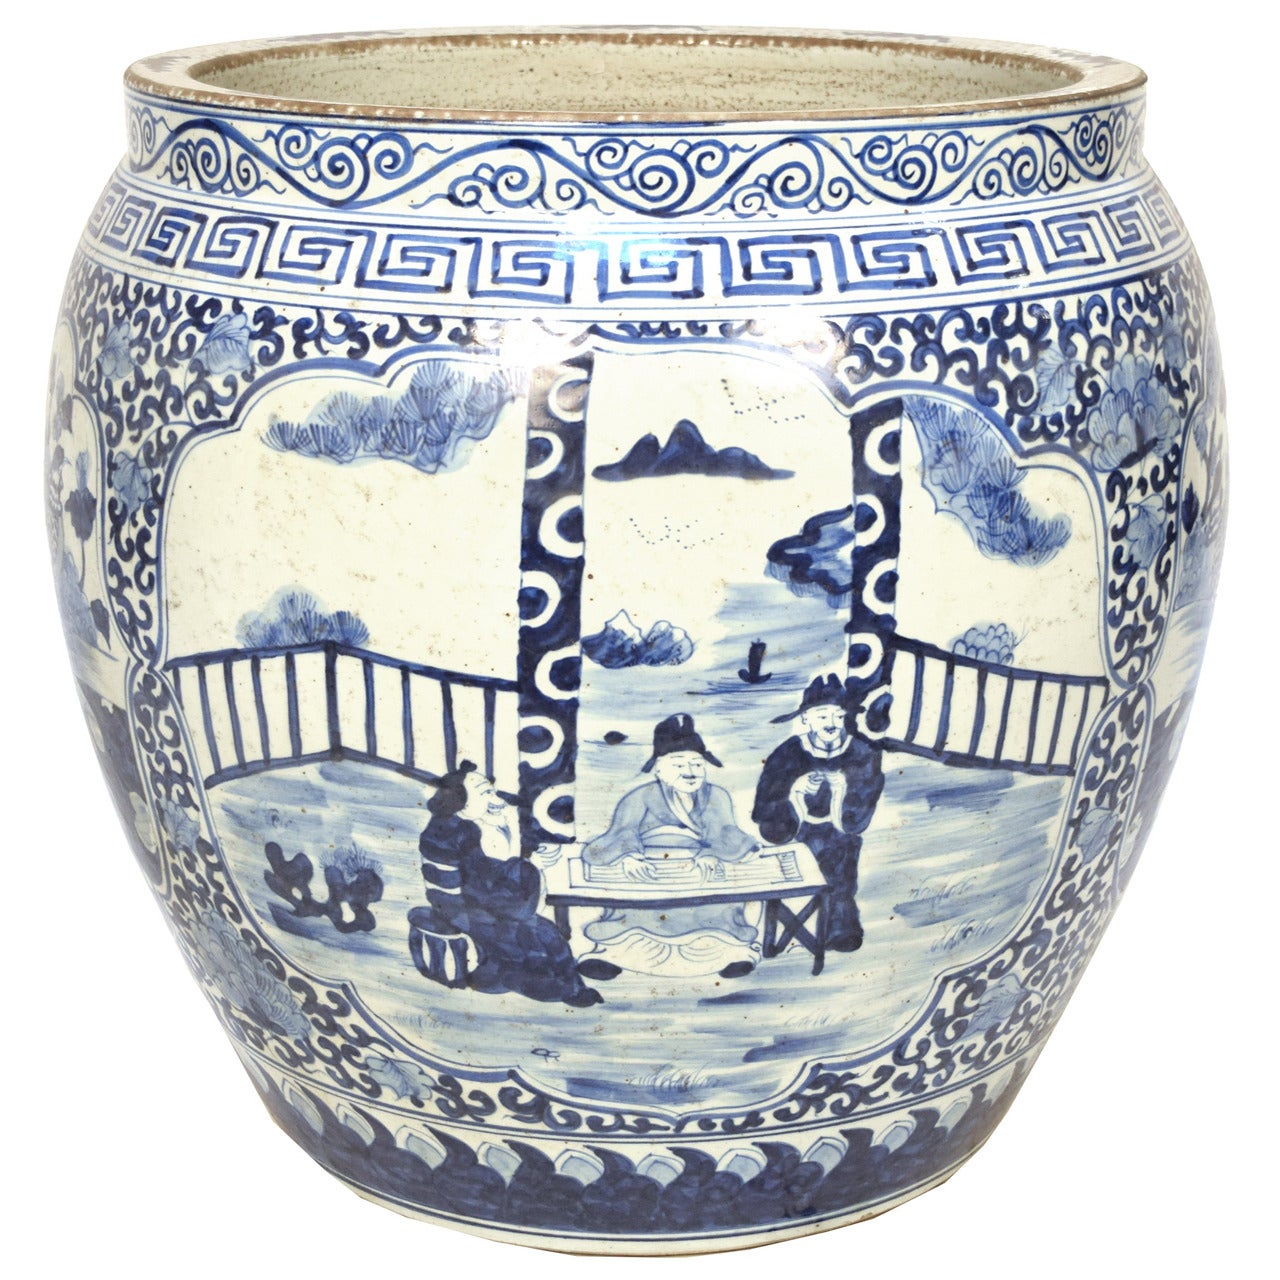 Blue and White Chinese Fish Bowl